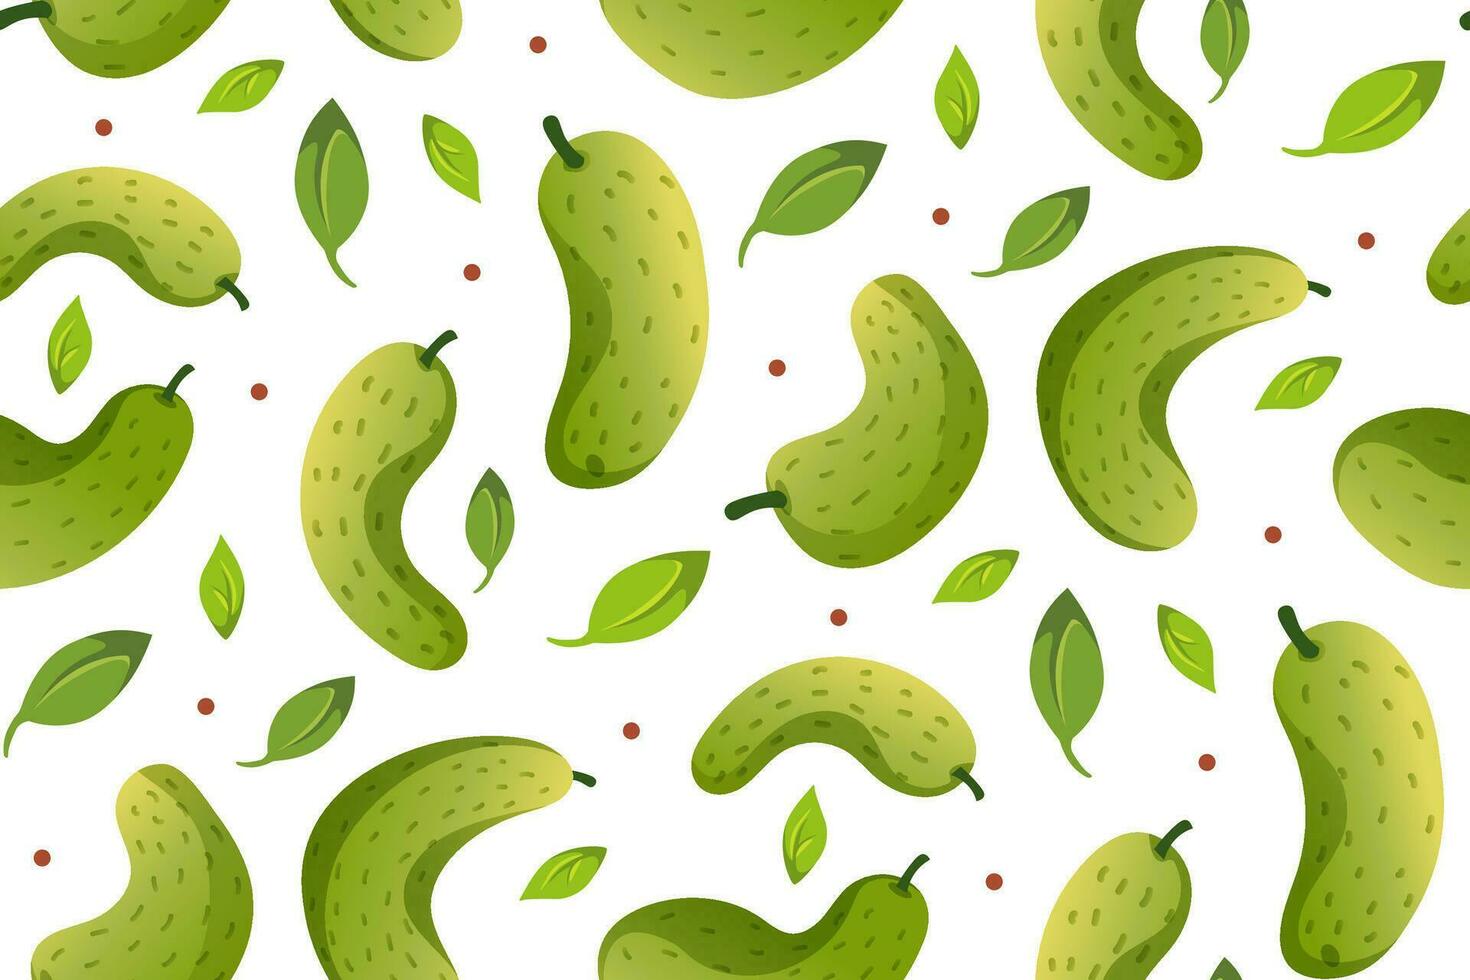 Harvest seamless Pattern. Cucumbers vector flat illustration. Pattern for background, printing on wrapping paper, wallpaper or fabric.